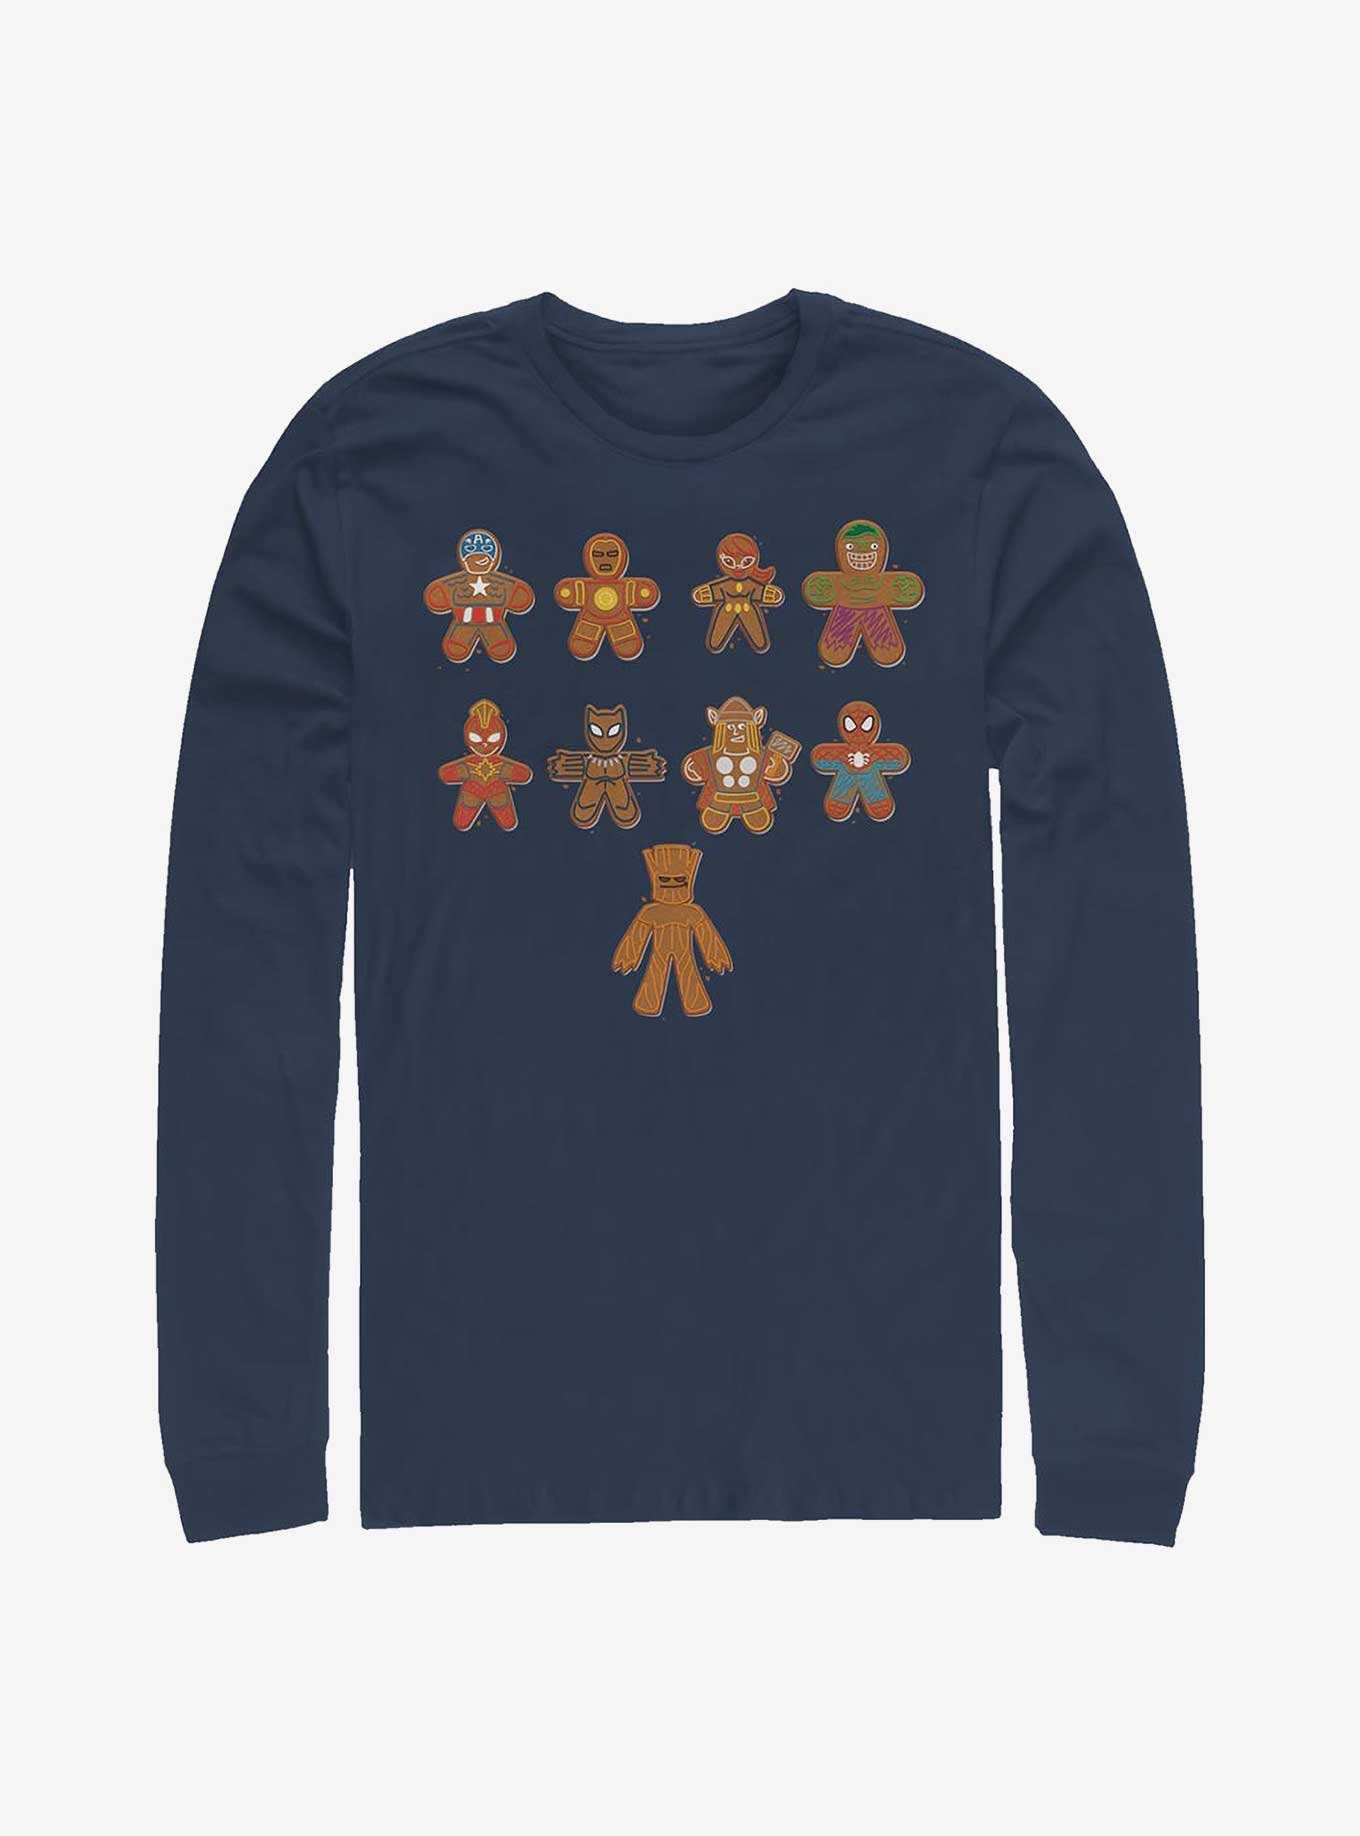 Marvel Lined Up Gingerbread Cookies Long-Sleeve T-Shirt, , hi-res